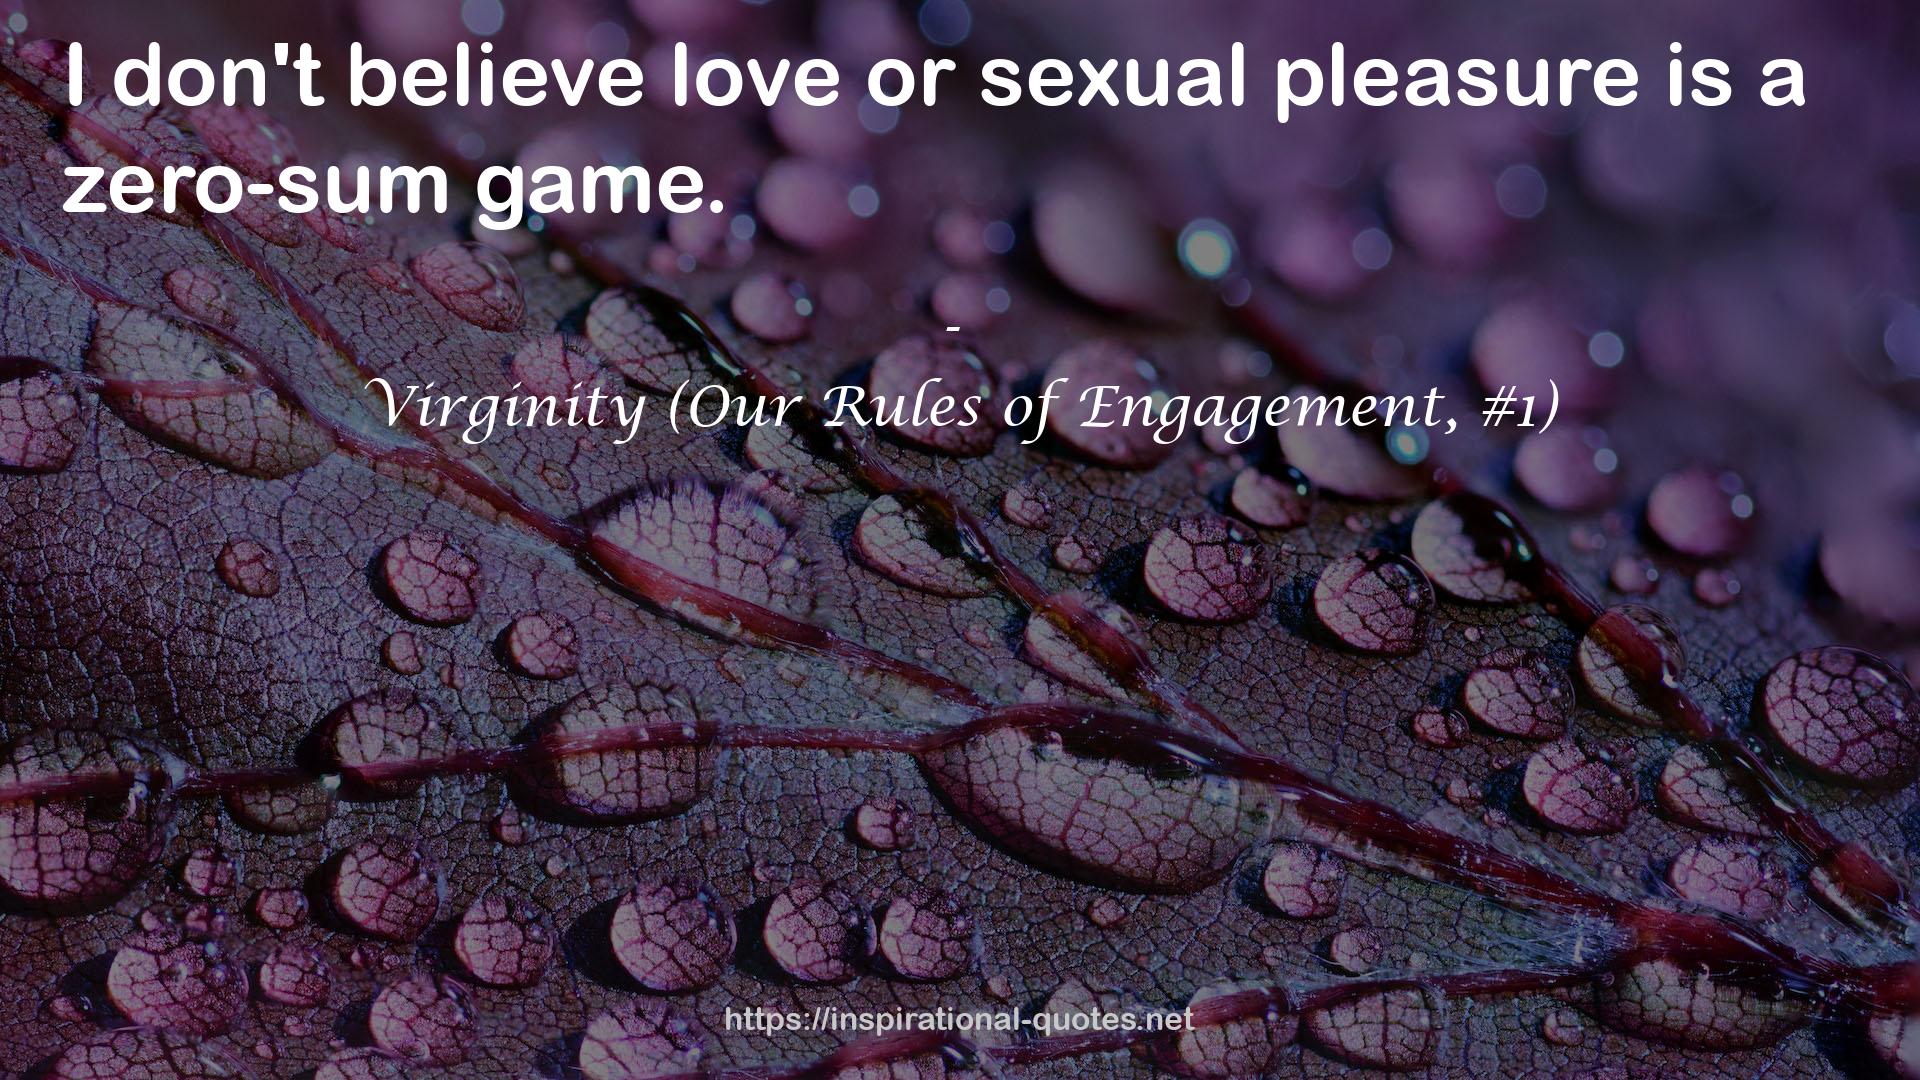 Virginity (Our Rules of Engagement, #1) QUOTES